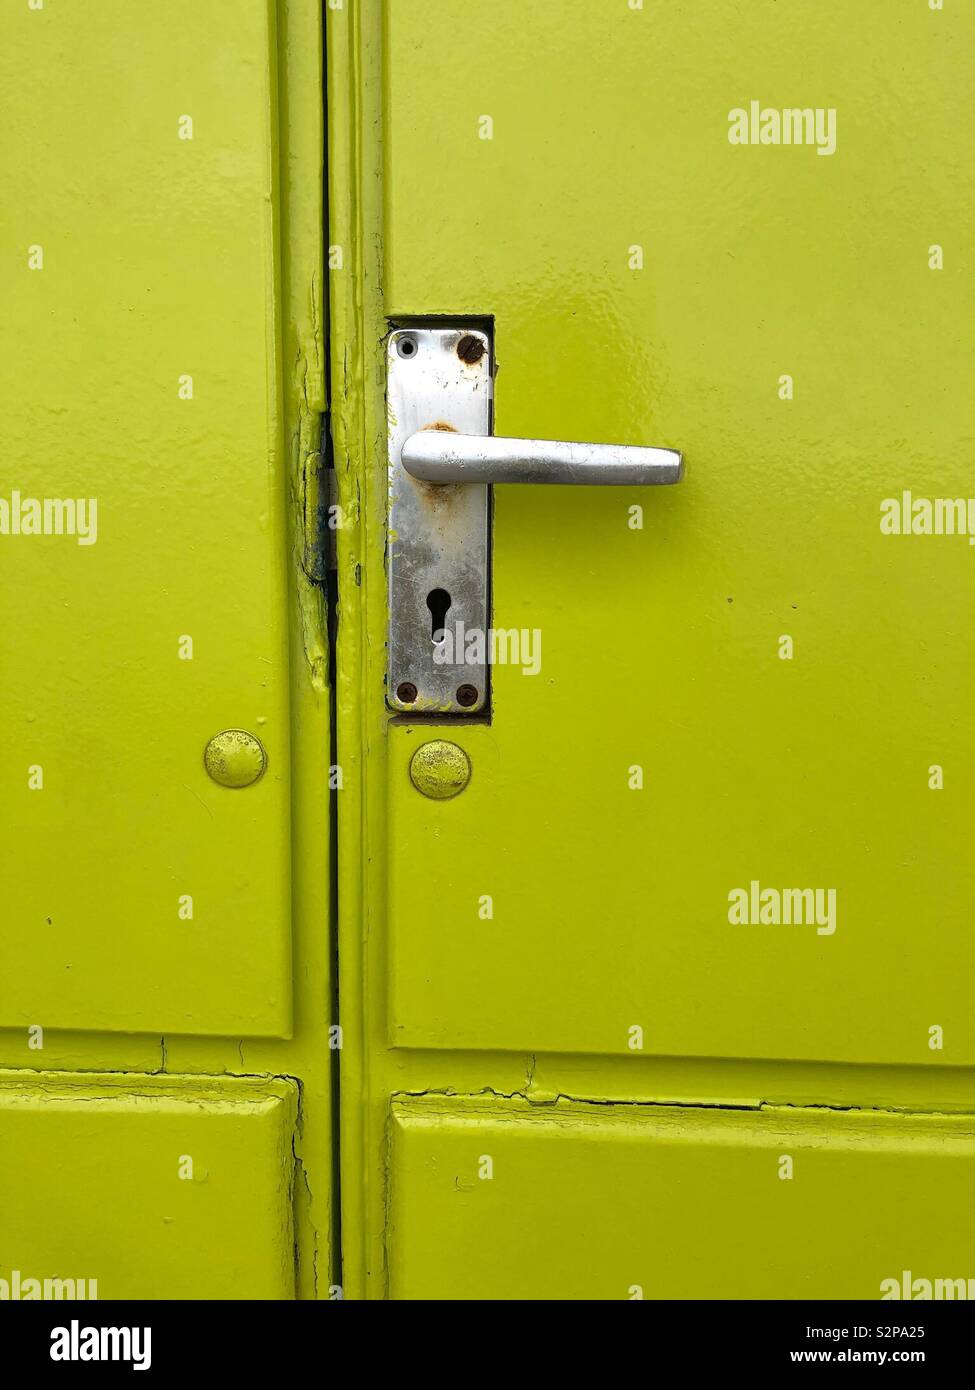 Abstract formed by a lime green painted door with handle and keyhole Stock Photo